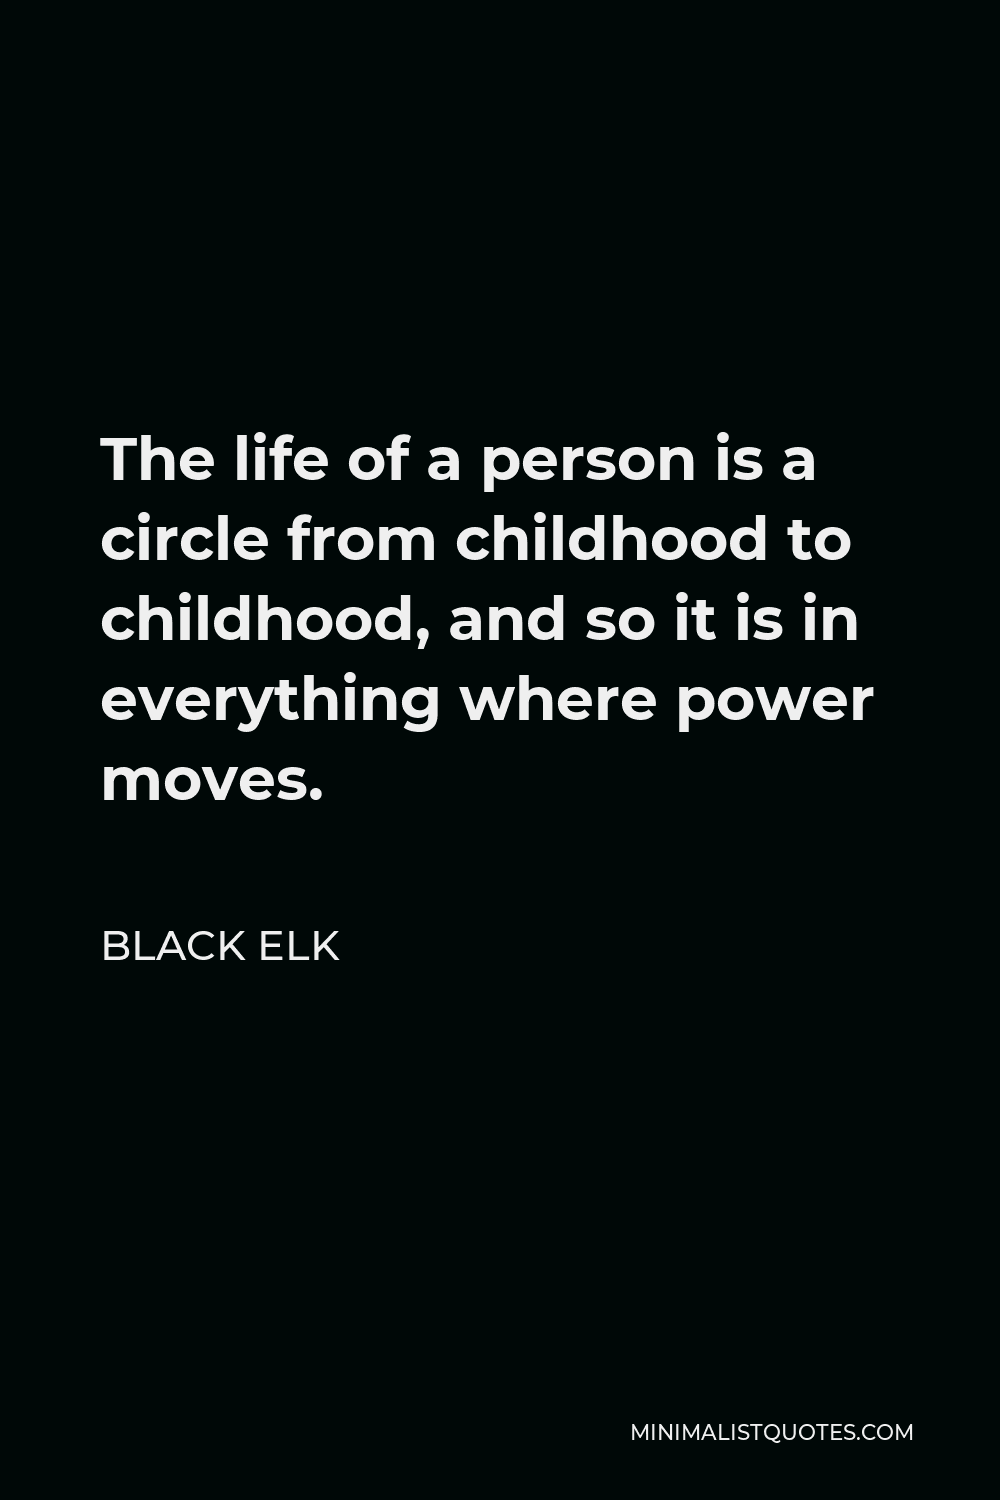 Black Elk Quote - The life of a person is a circle from childhood to childhood, and so it is in everything where power moves.